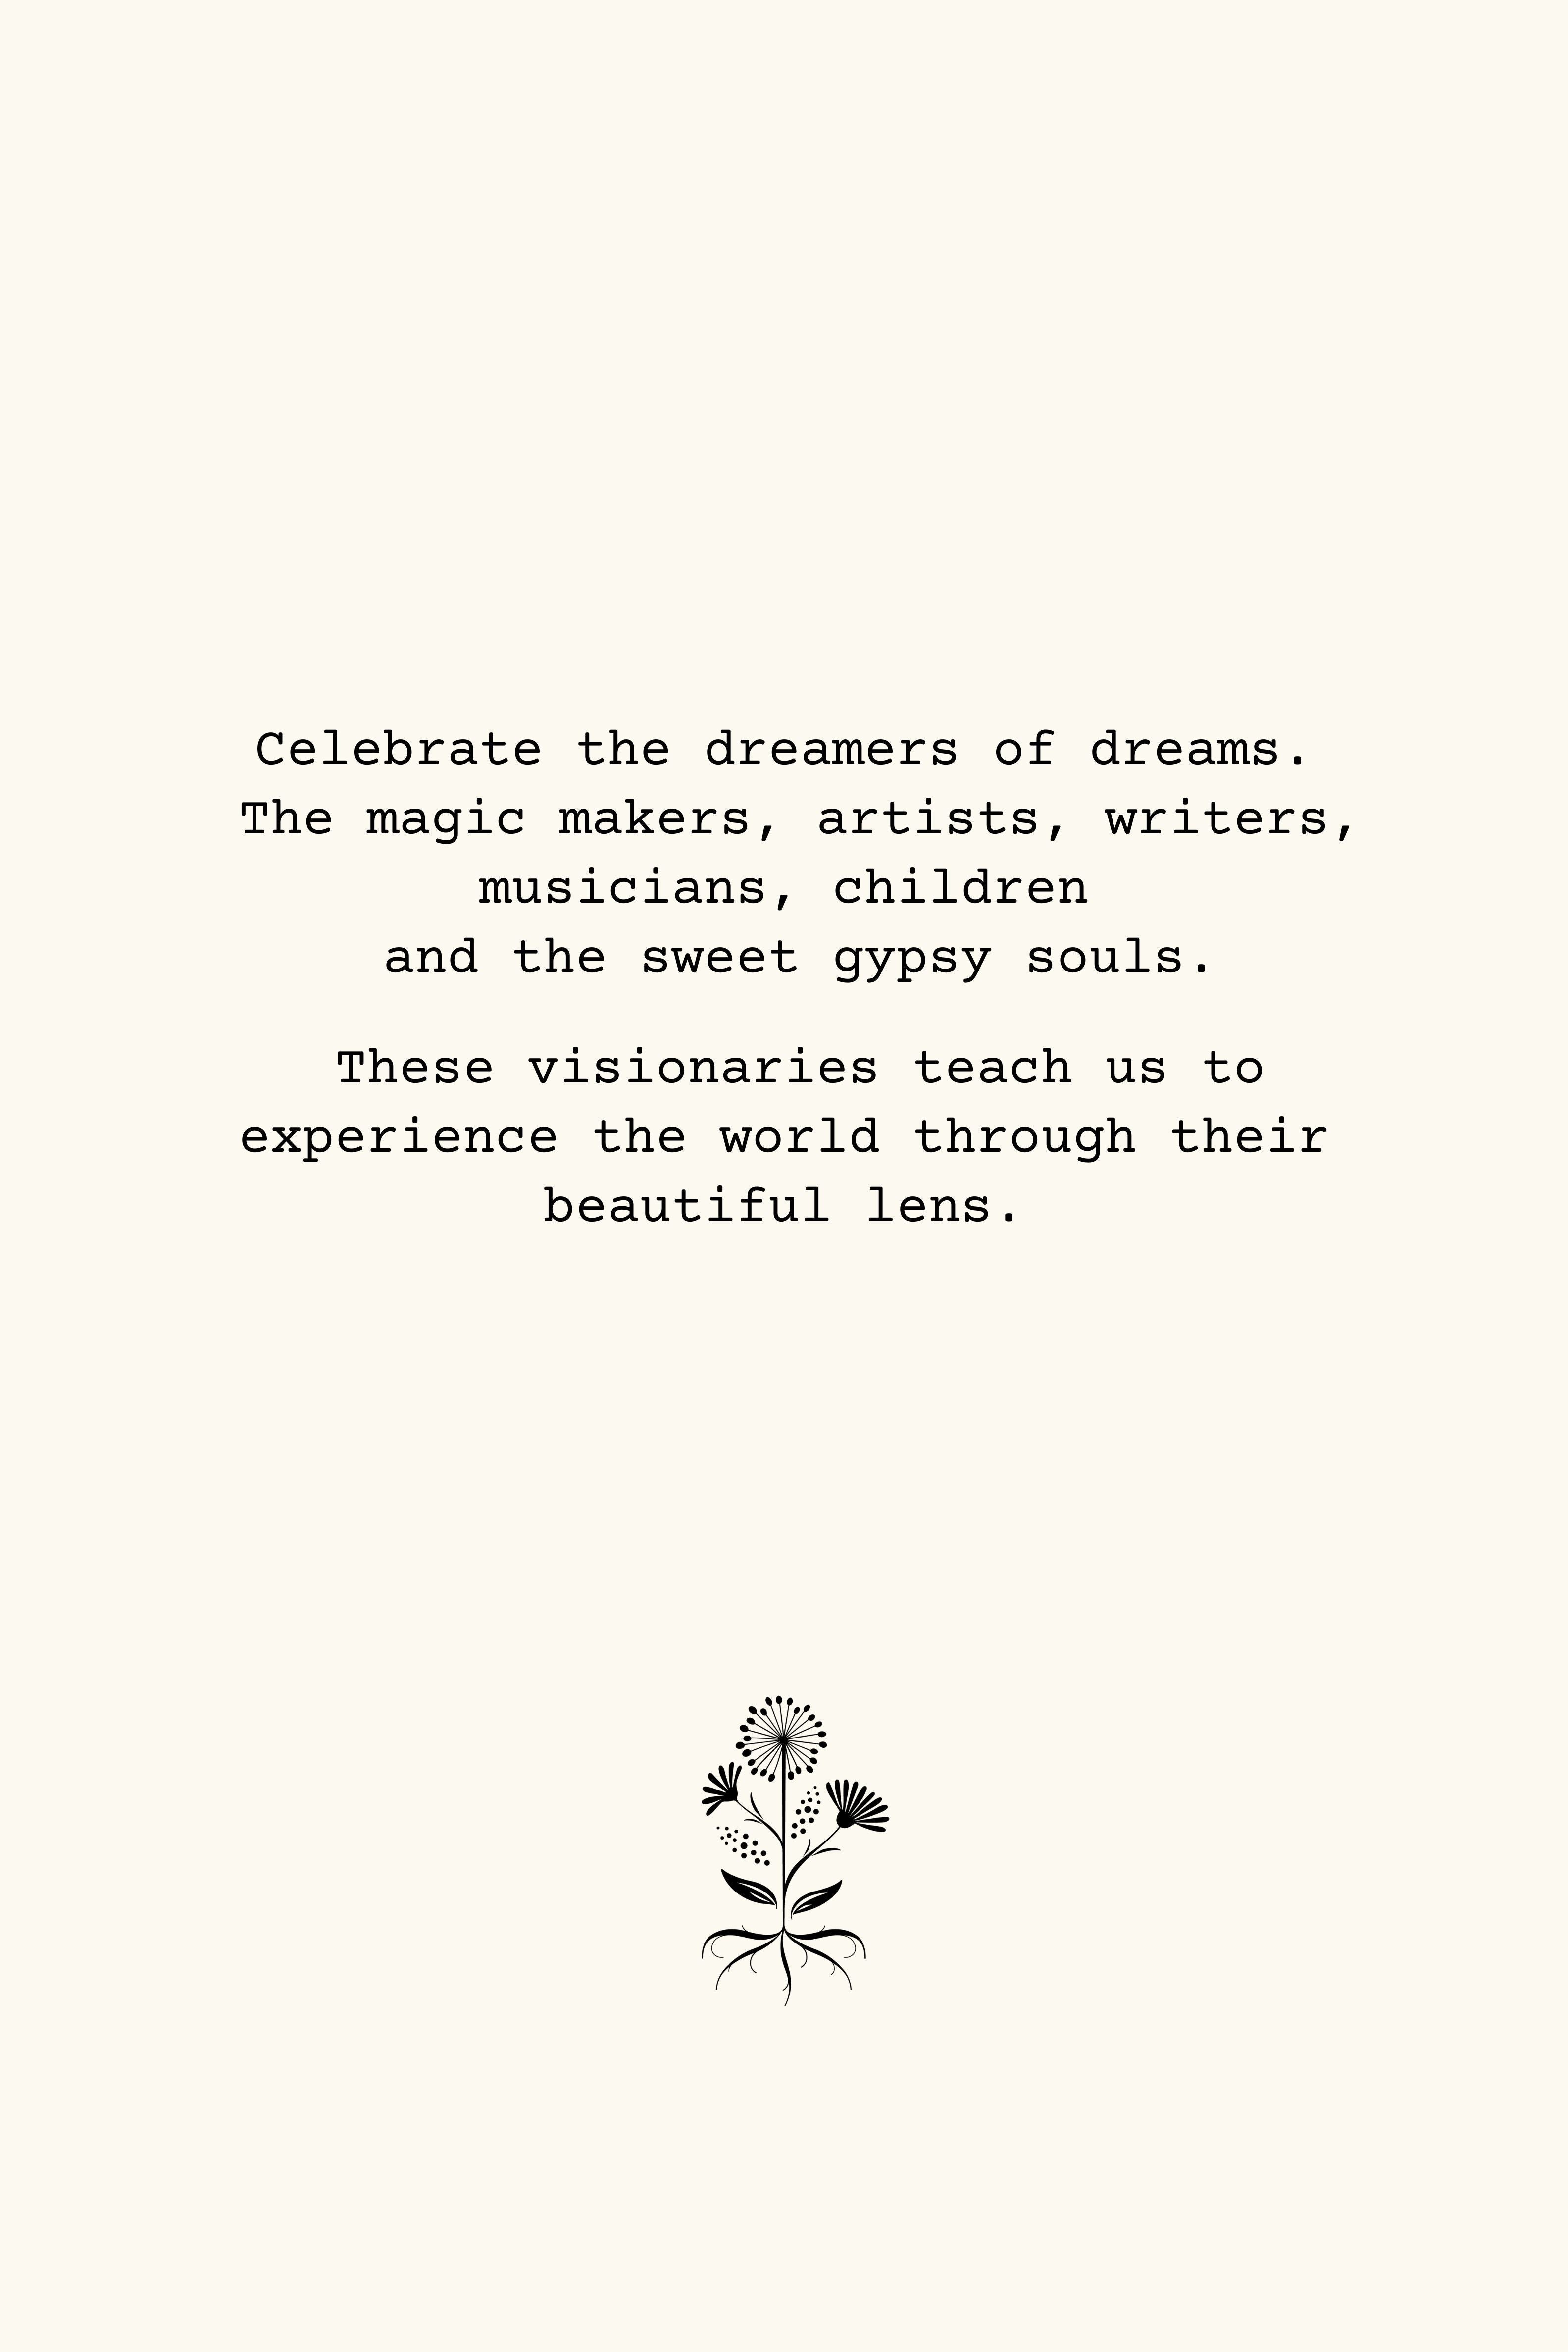 Giclee Fine Art Print: Celebrate the dreamers of dreams. The magic makers, artists, writers, musicians, children, and sweet gypsy souls. These visionaries teach us to experience their world through their beautiful lens.